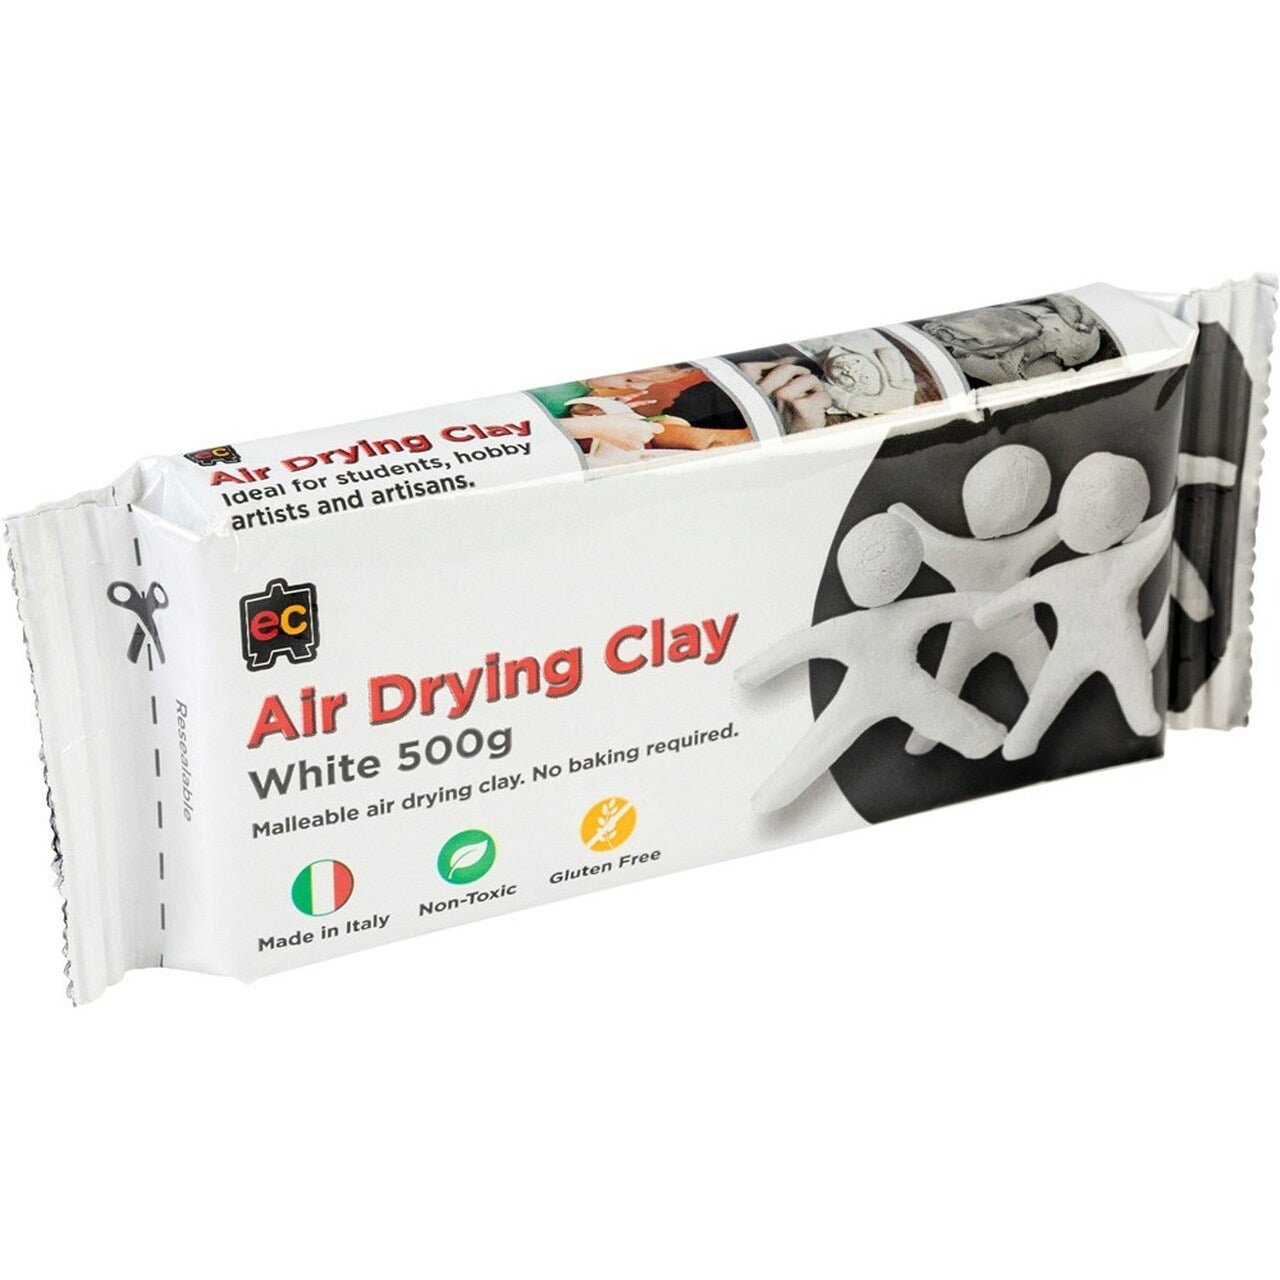 AIR DRYING CLAY WHITE 500g by EDUCATIONAL COLOURS - The Playful Collective